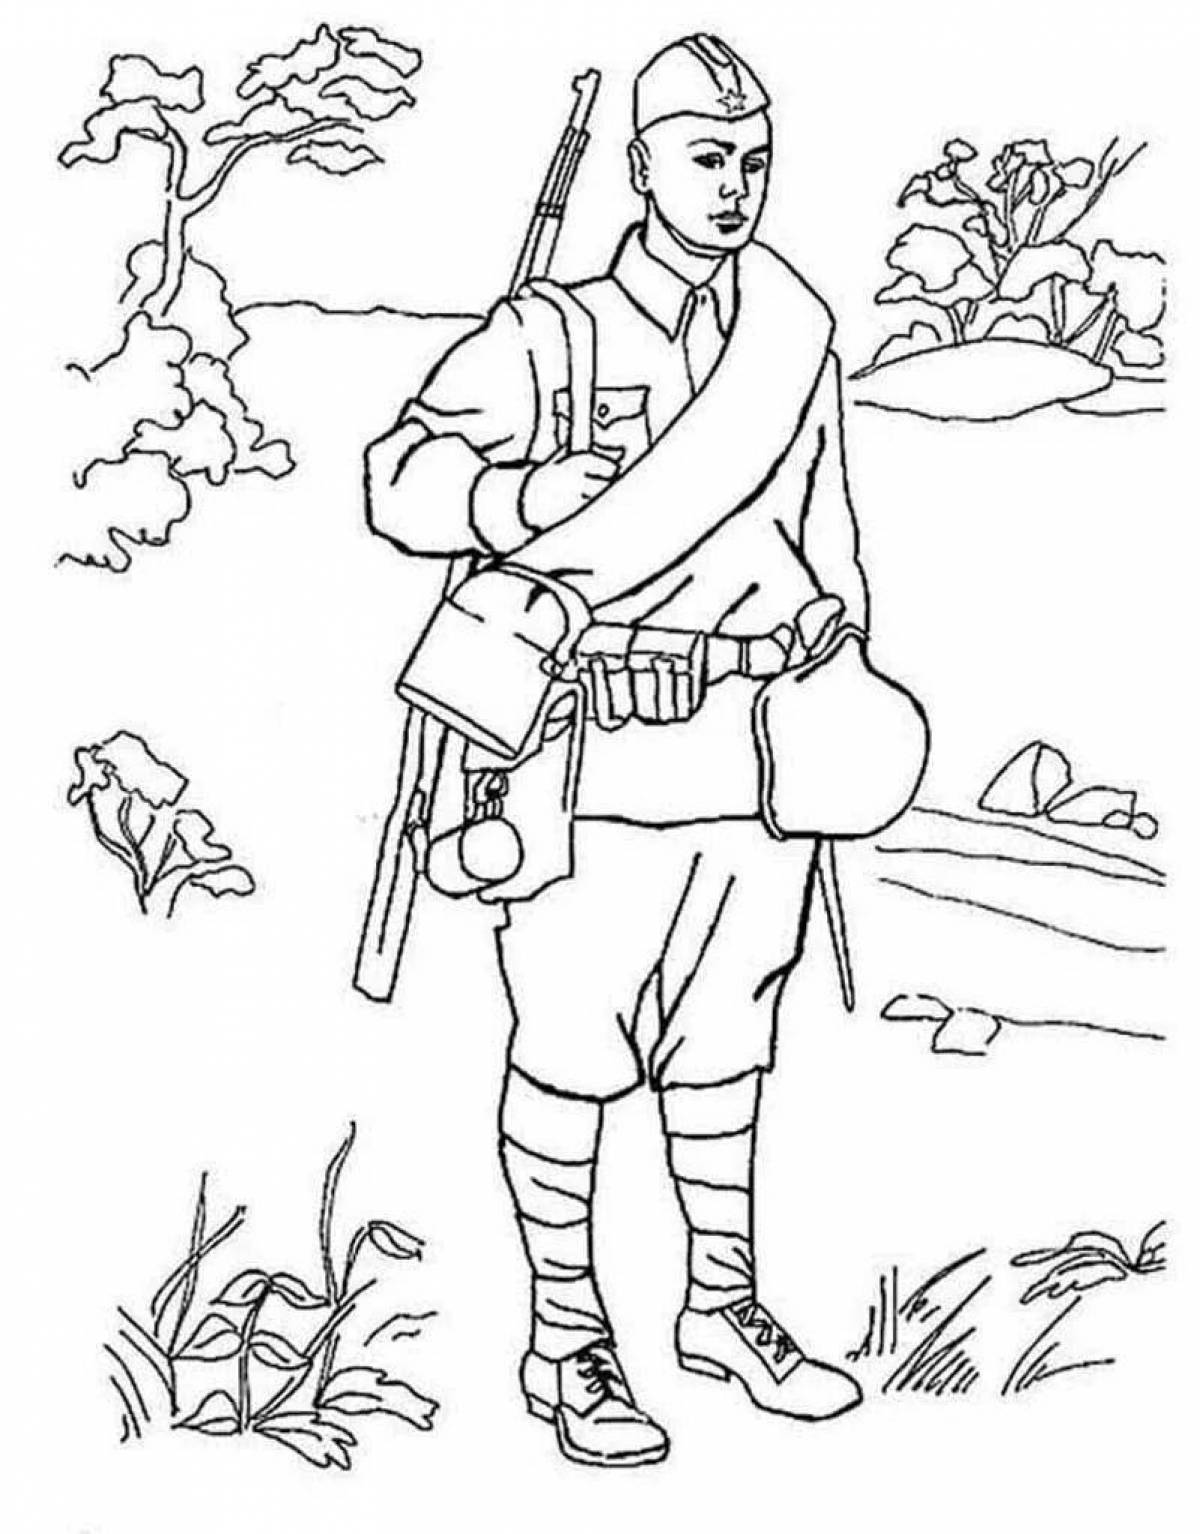 Glorious Russian soldier coloring book for kids